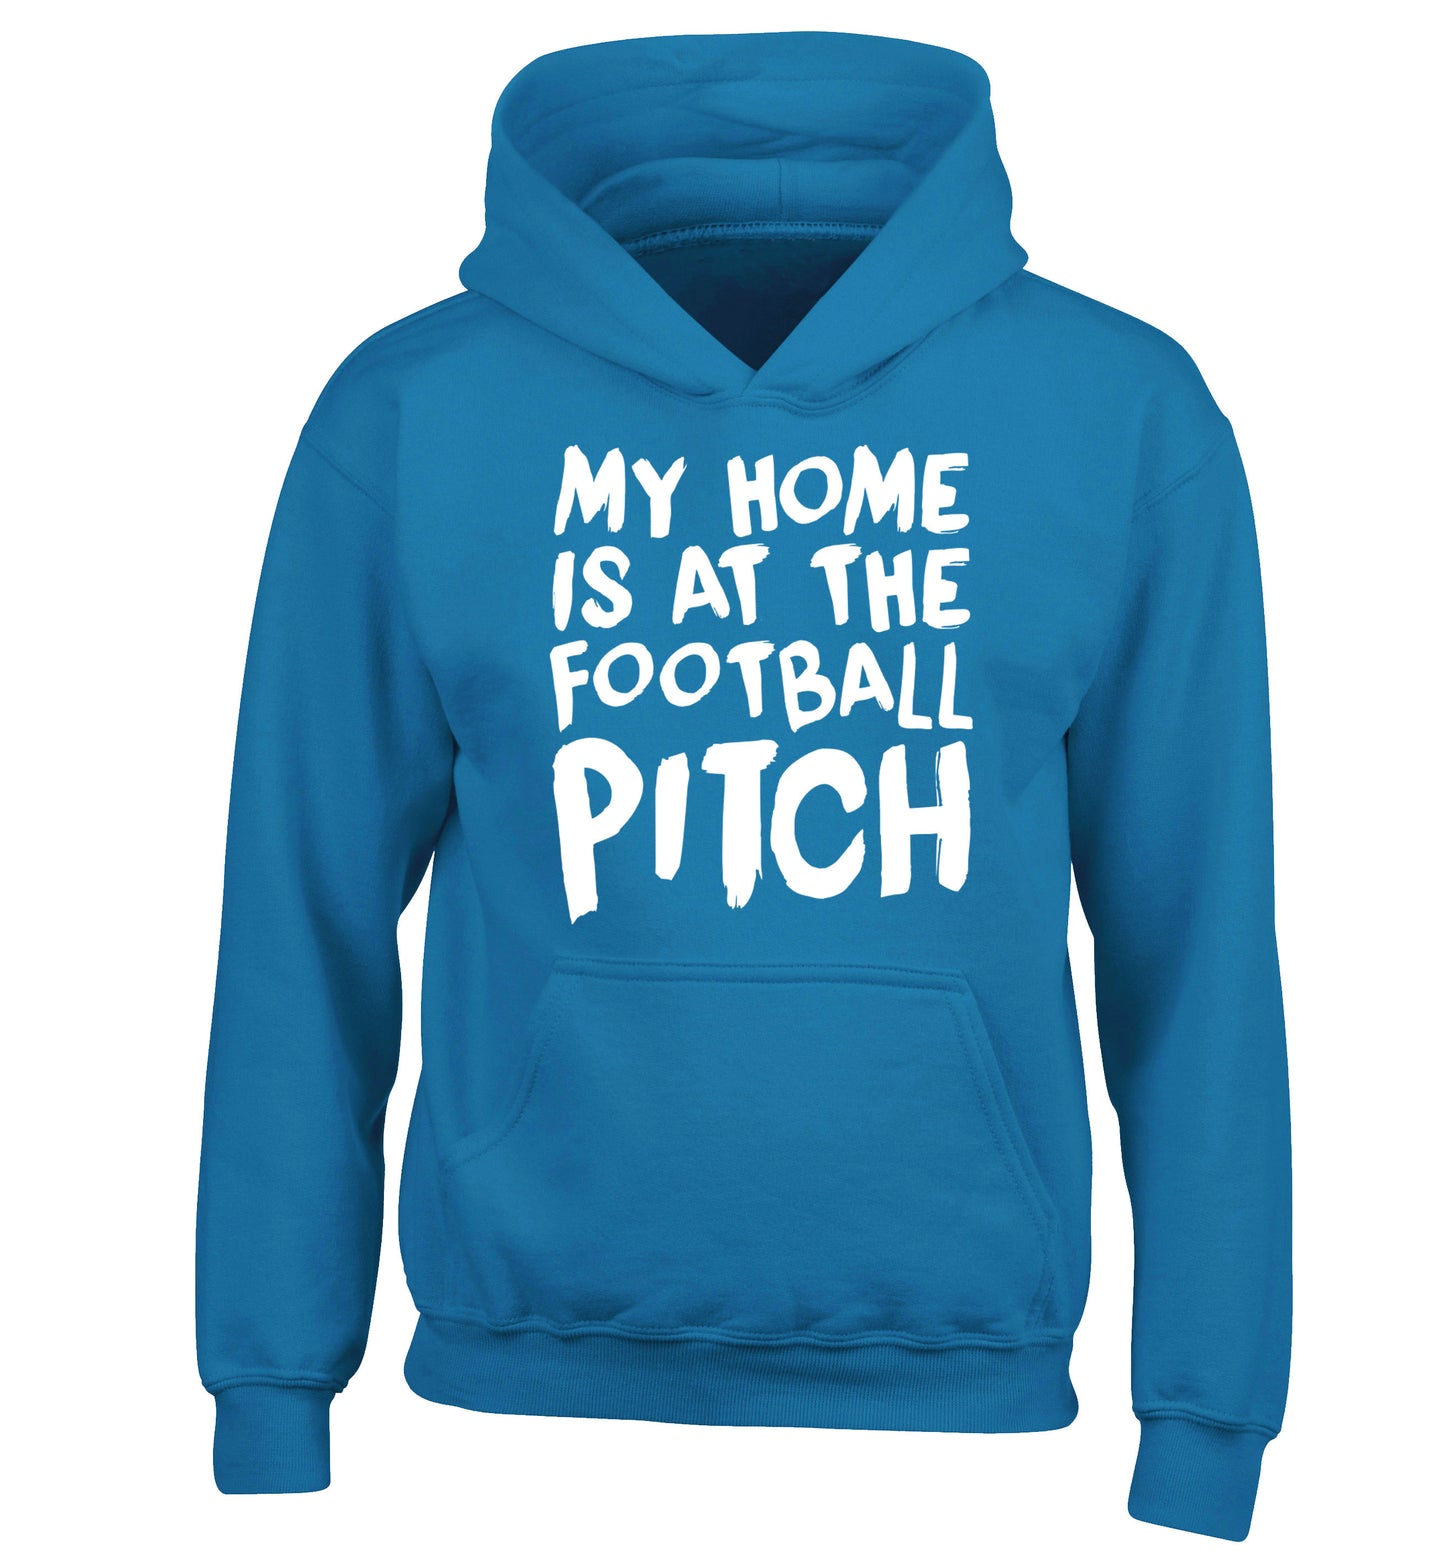 My home is at the football pitch children's blue hoodie 12-14 Years